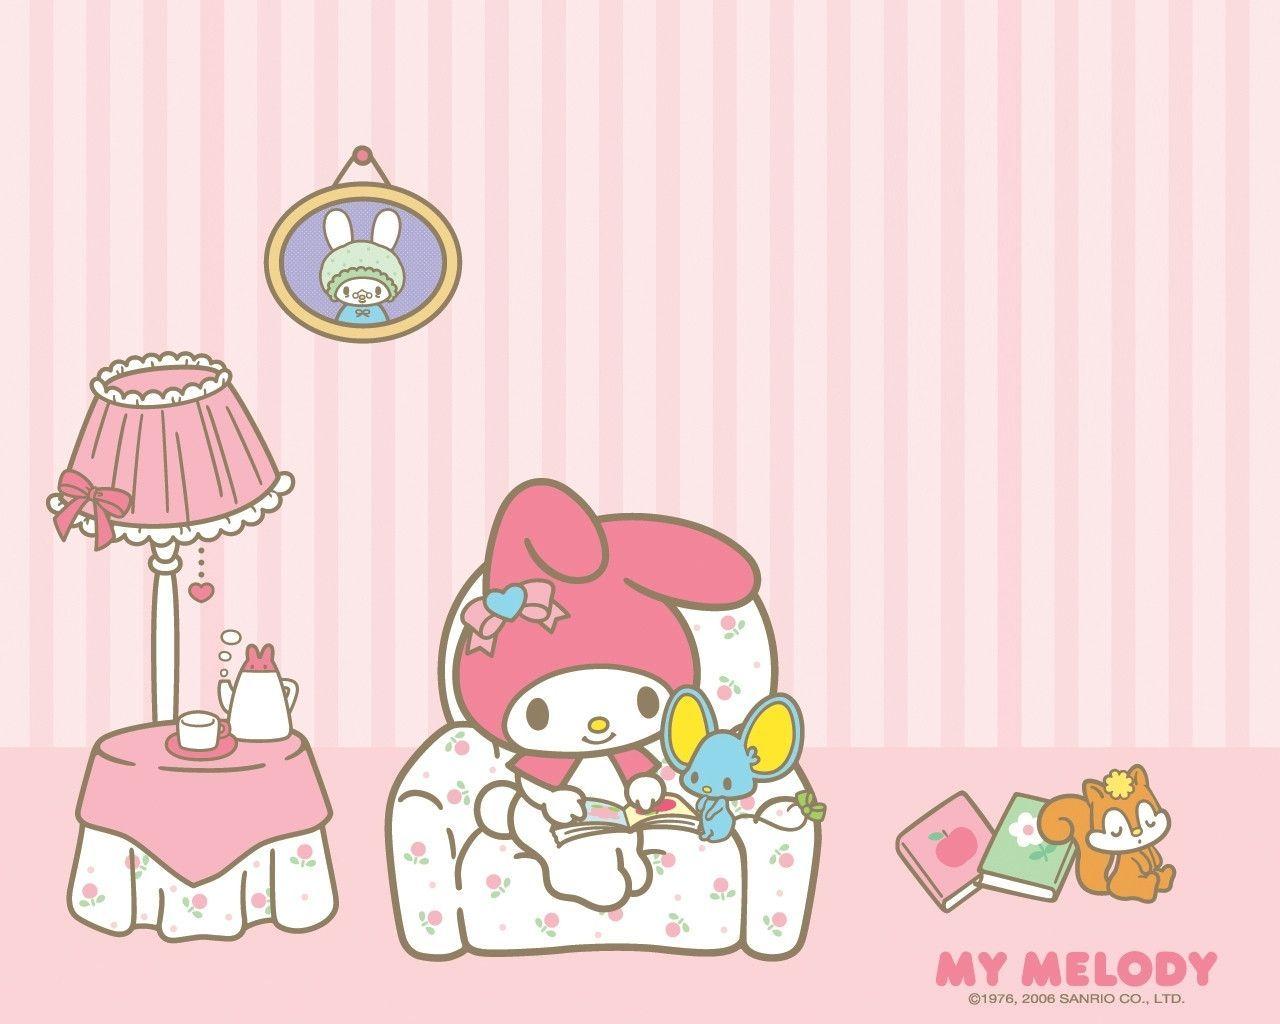 My Melody Books HD Wallpaper For Desktop Background